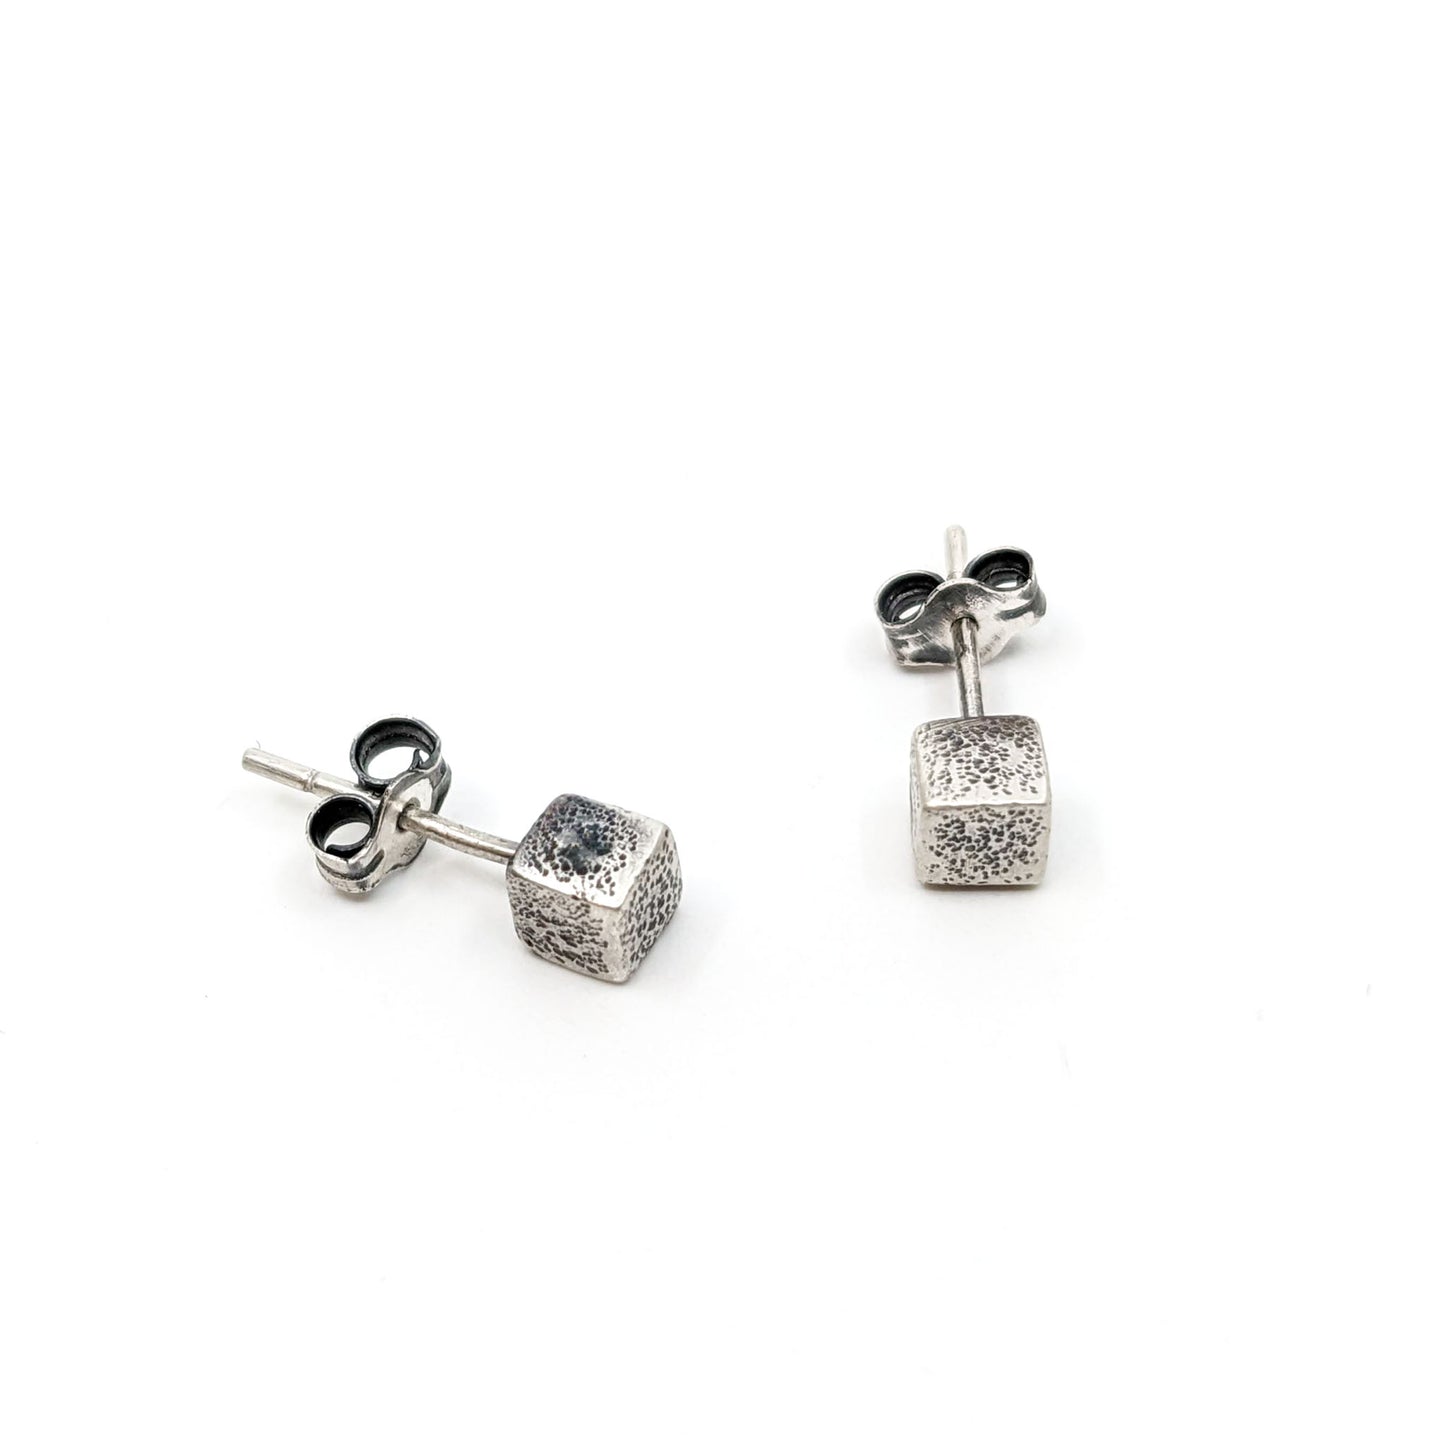 TN- Square Post Textured Earrings